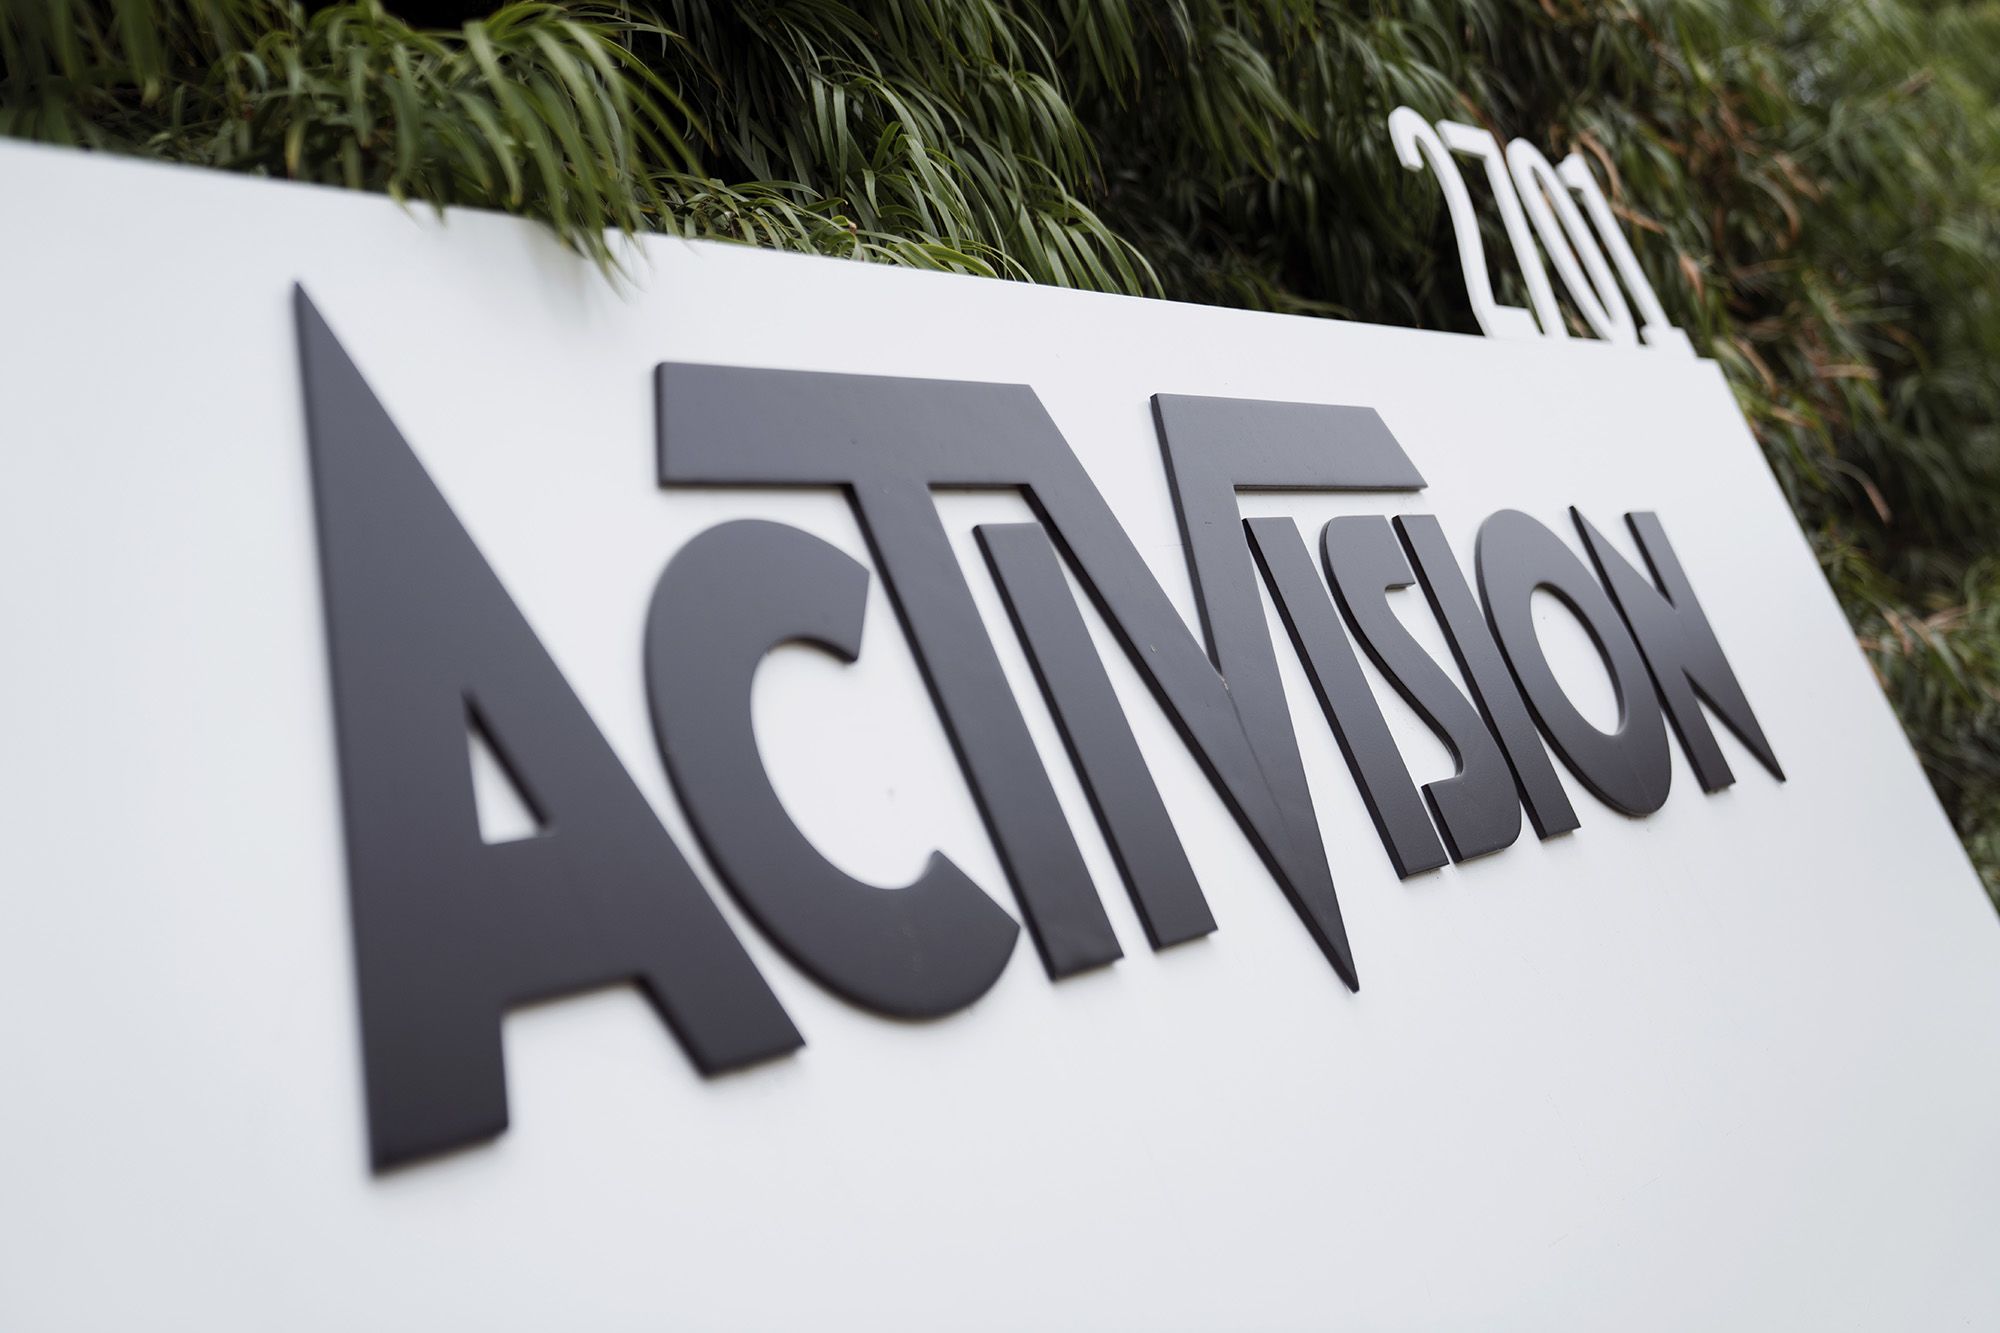 Microsoft's Activision-Blizzard Acquisition Deal Blocked By UK